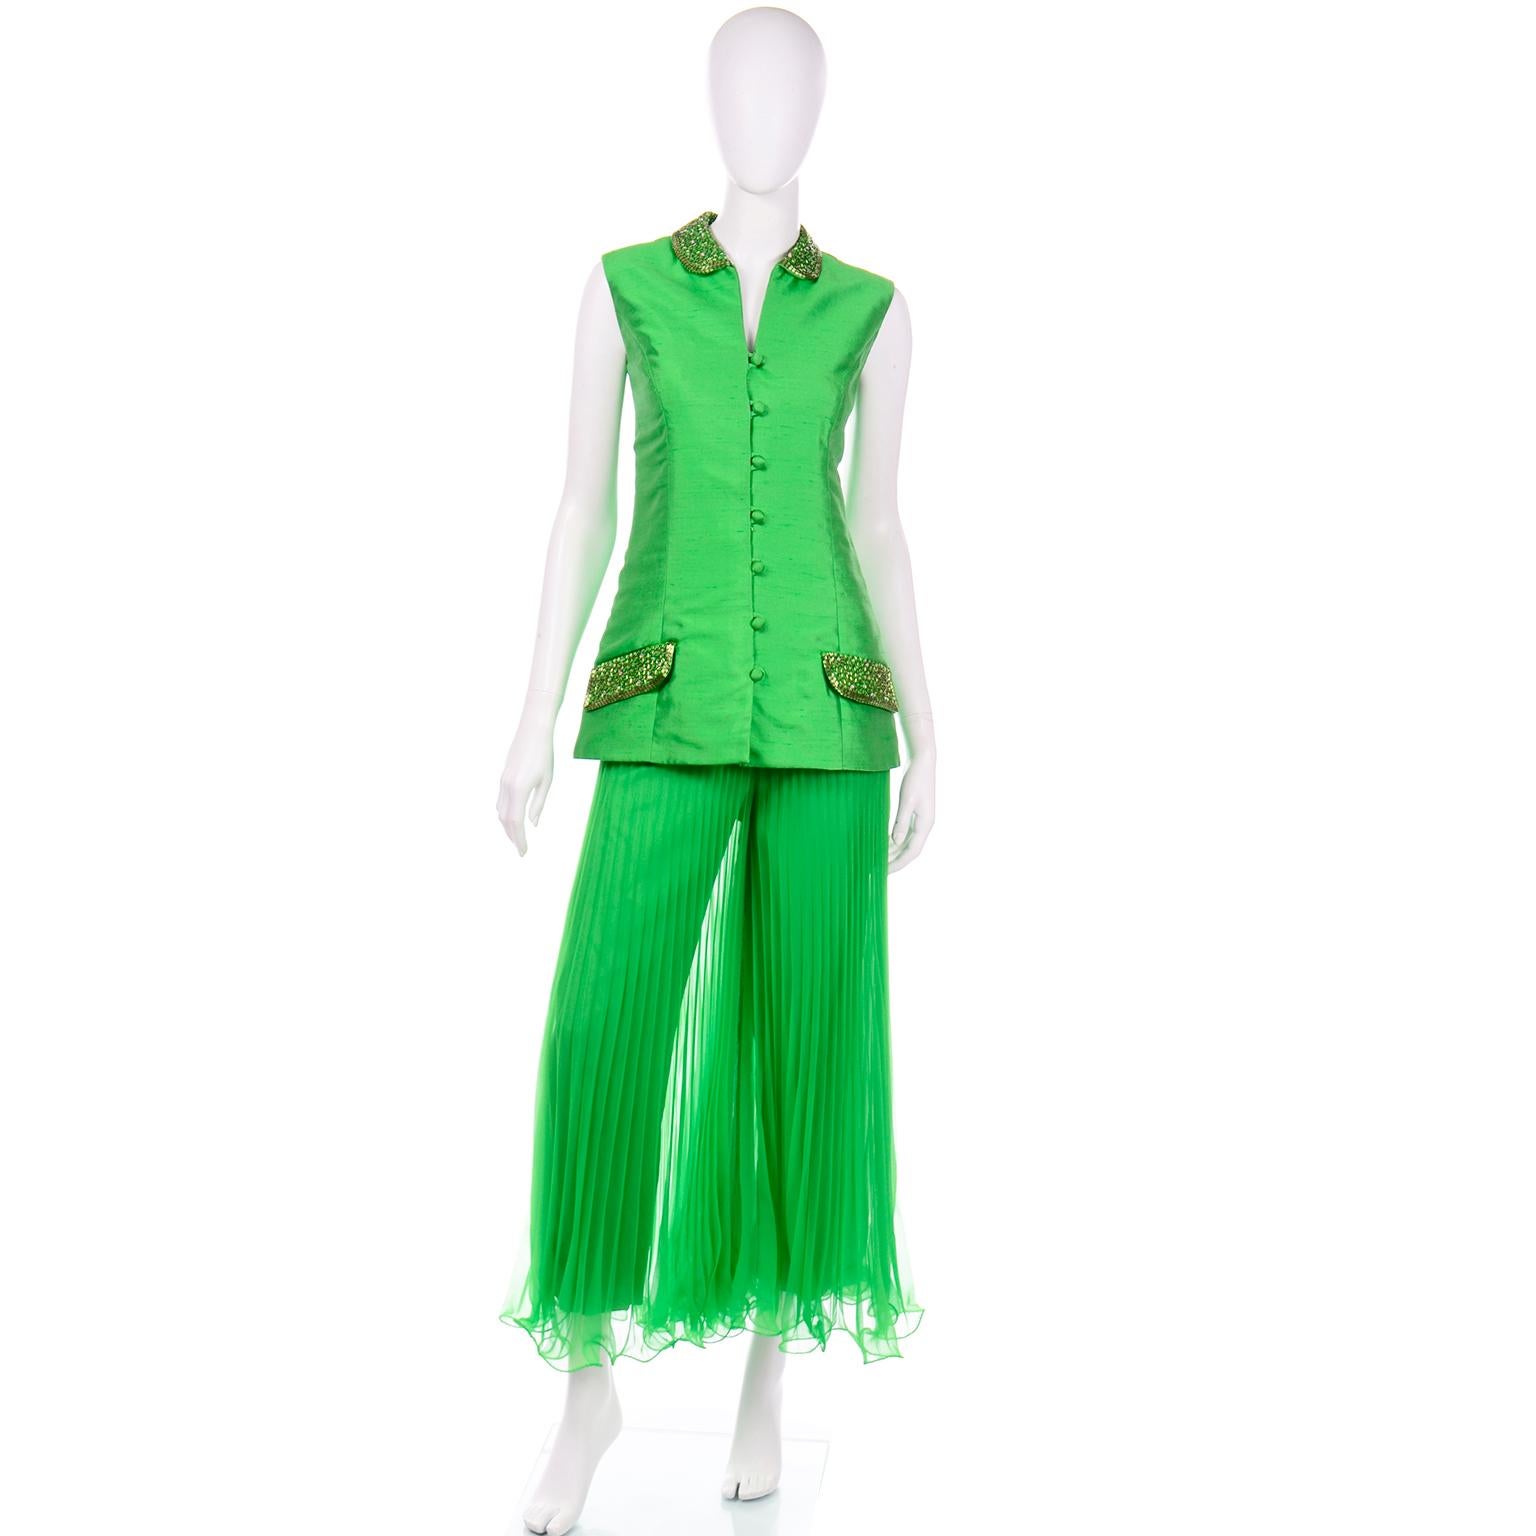 This is a sensational vintage bright green raw silk evening dress alternative outfit designed by Dupuis for Jack Bryan. This great evening ensemble includes a beaded sleeveless jacket and a pair of  wide leg pleated palazzo pants. Both pieces can be